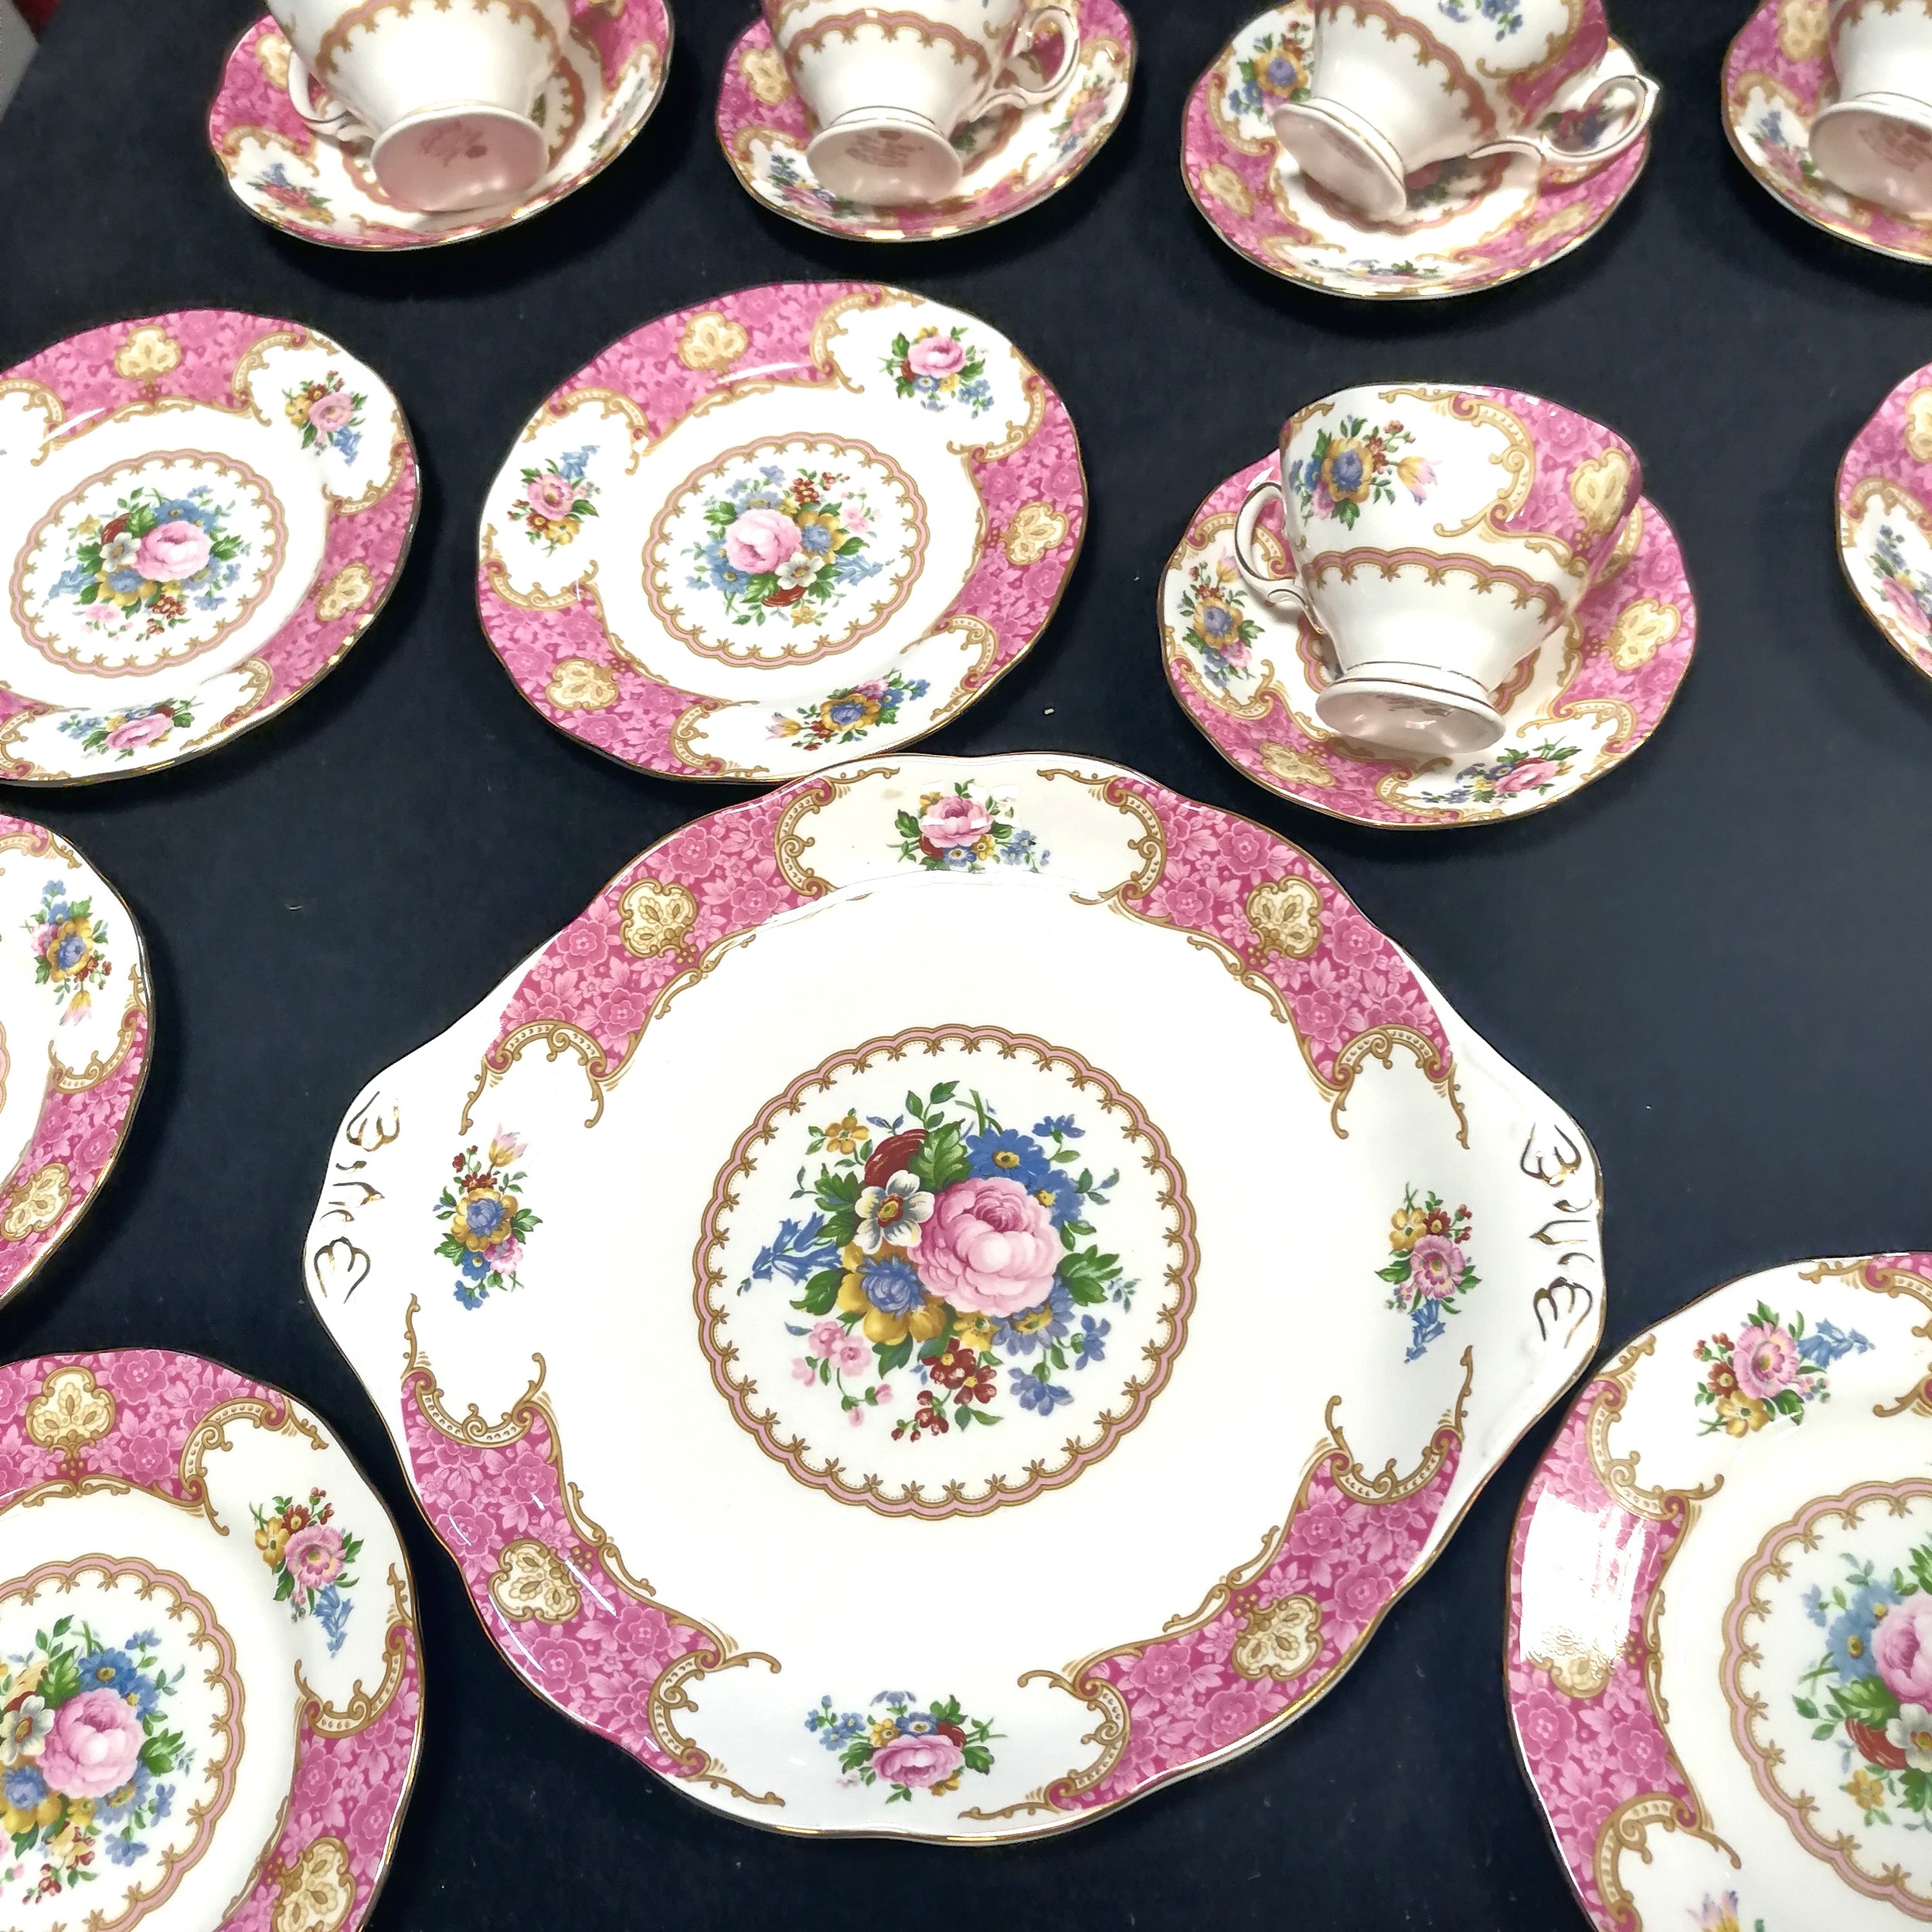 Royal Albert 'Lady Carlyle' tea and coffee ware - 5 coffee cups and saucers, 6 tea cups and saucers, - Image 2 of 5